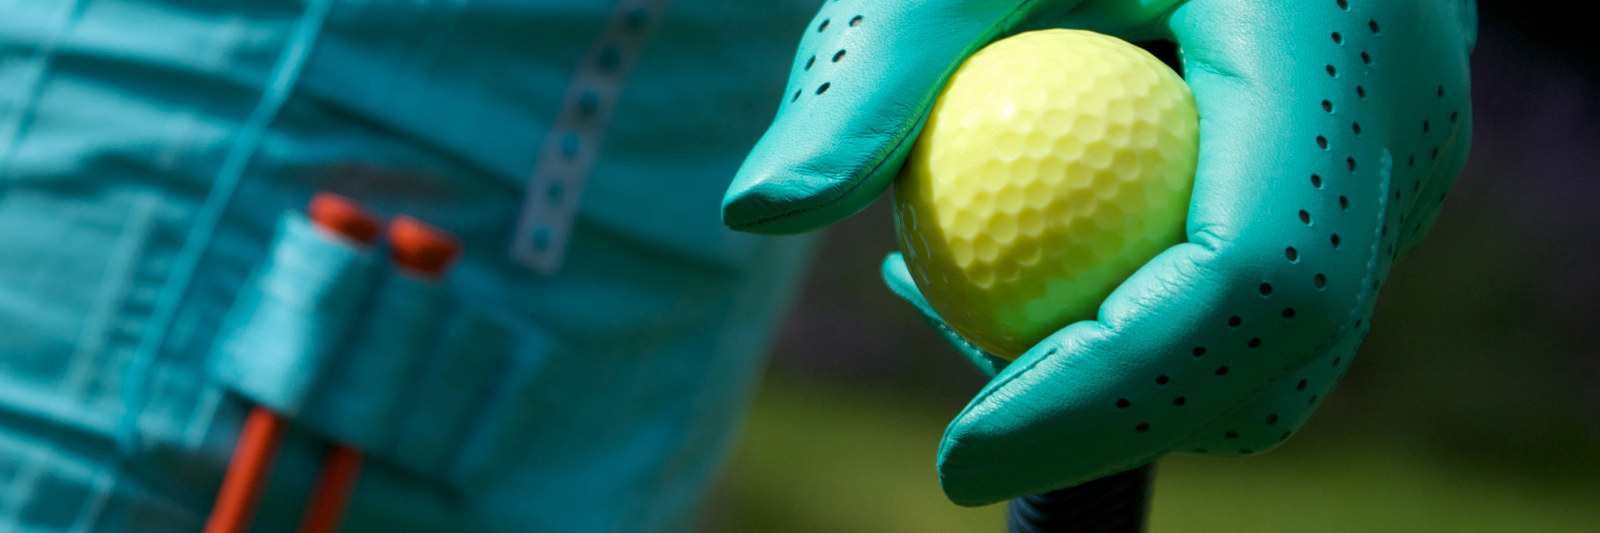 An up close image of a gloved hand placing a golf ball on top of a tee